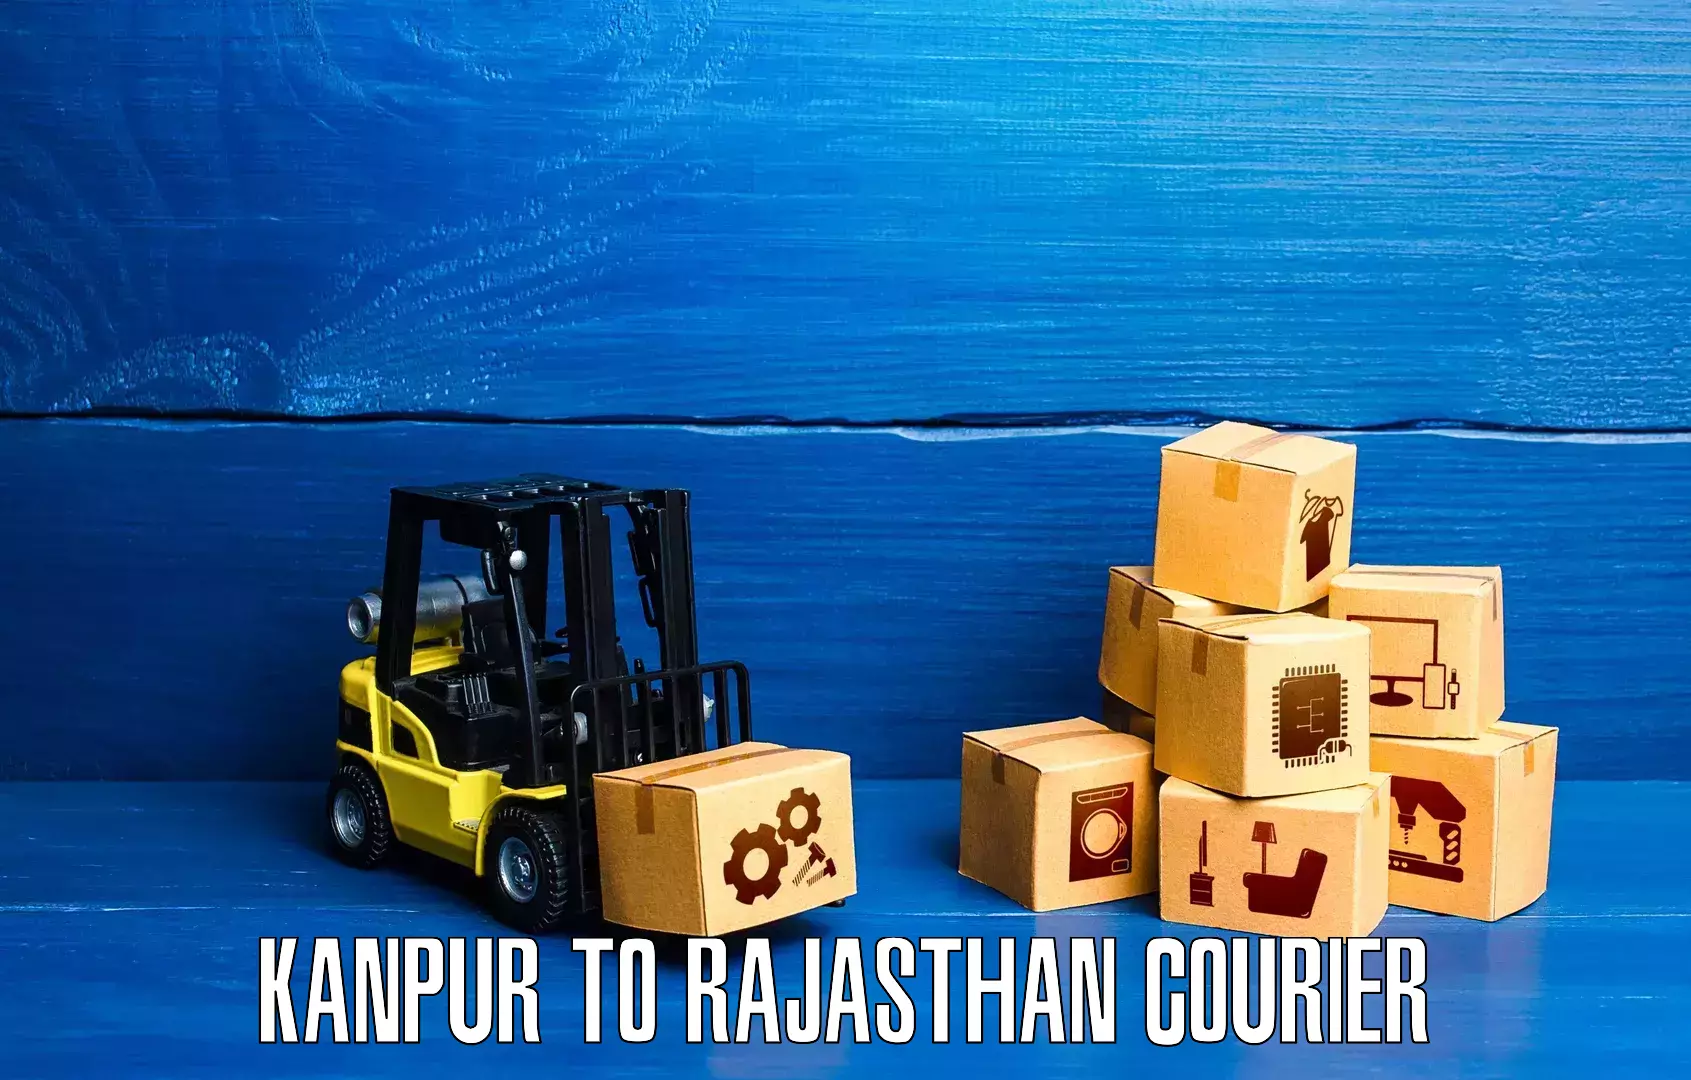 Pharmaceutical courier Kanpur to Piparcity